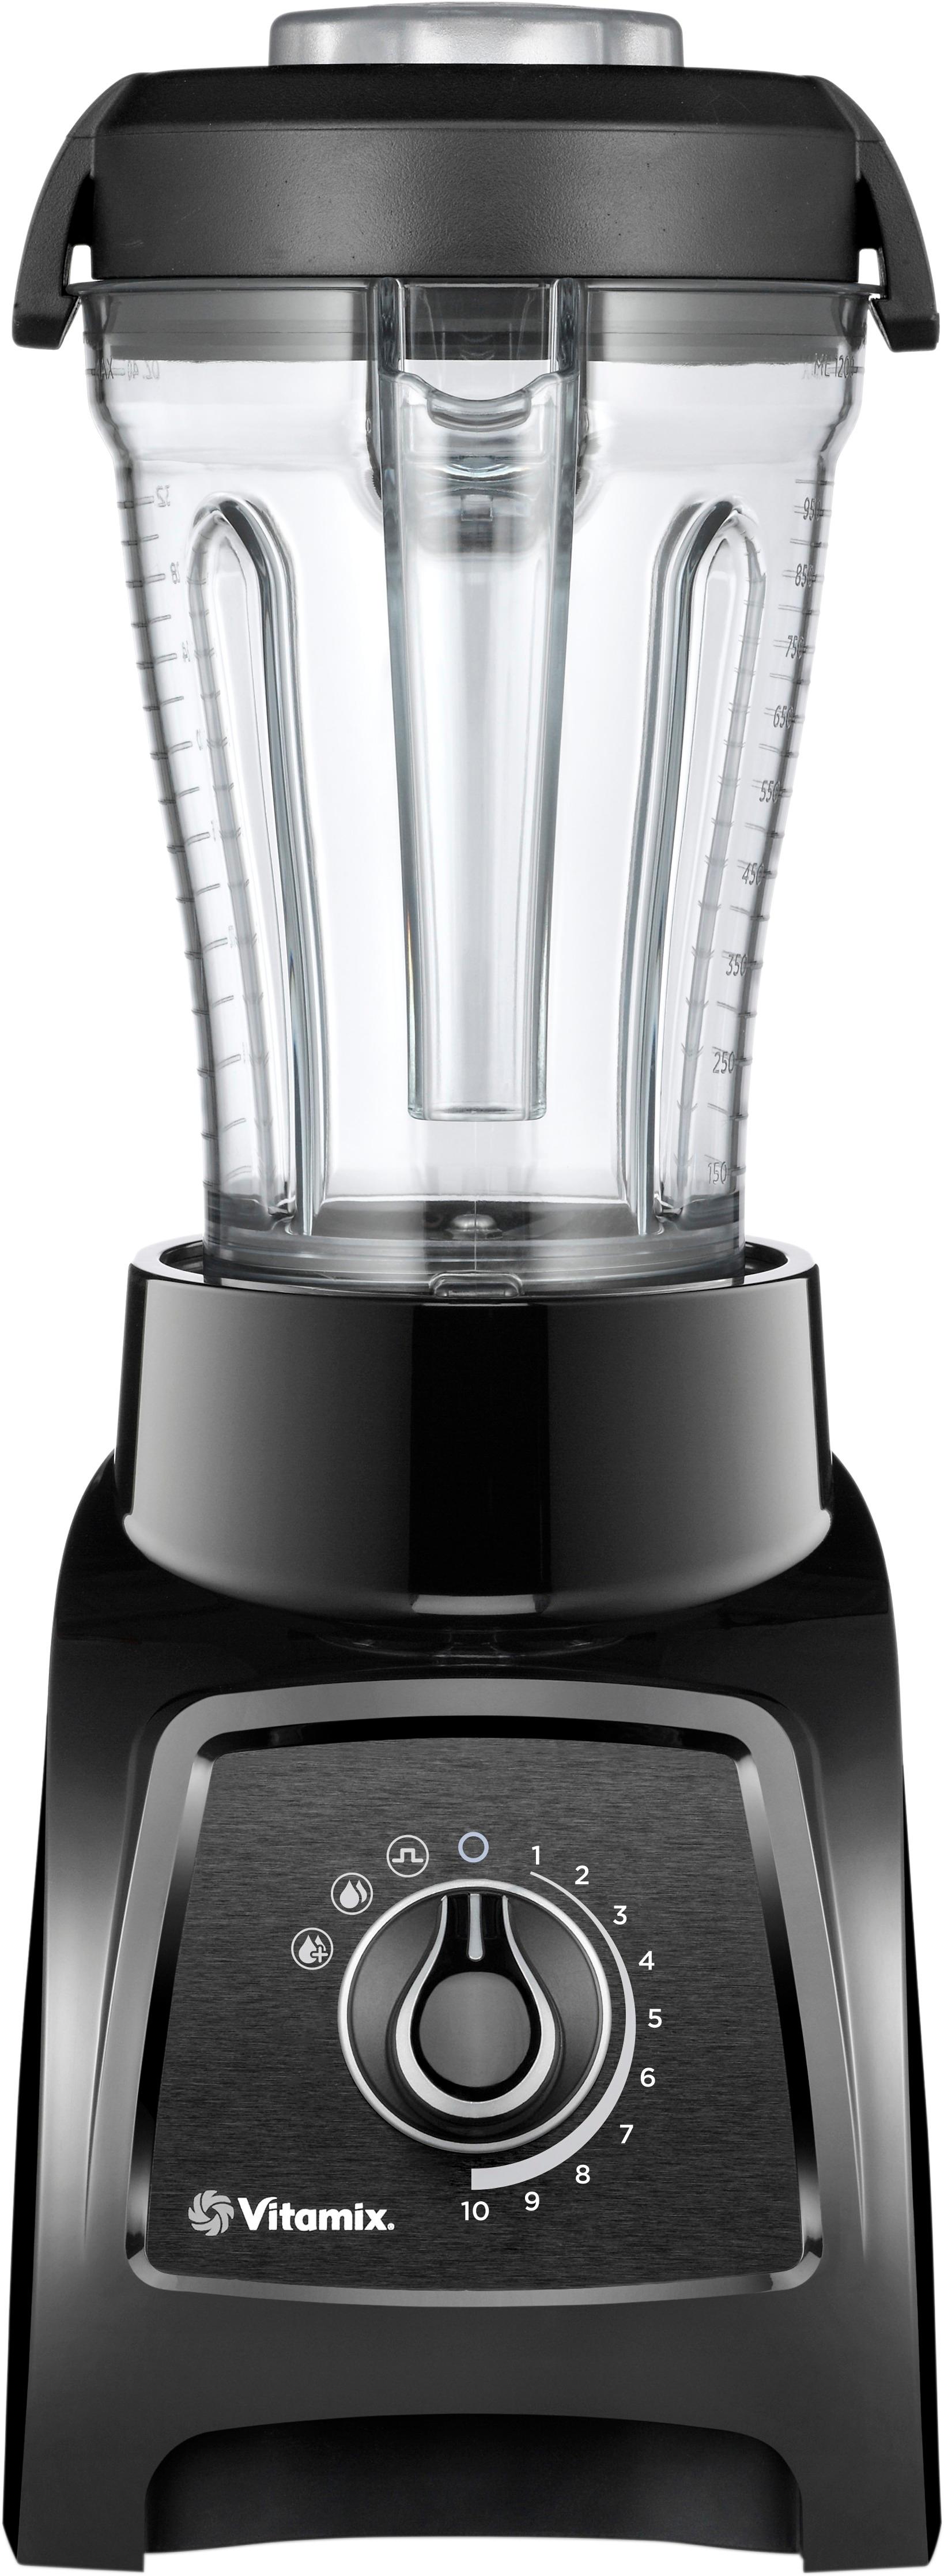 Vitamix blenders up to $150 off during 's Black Friday sale